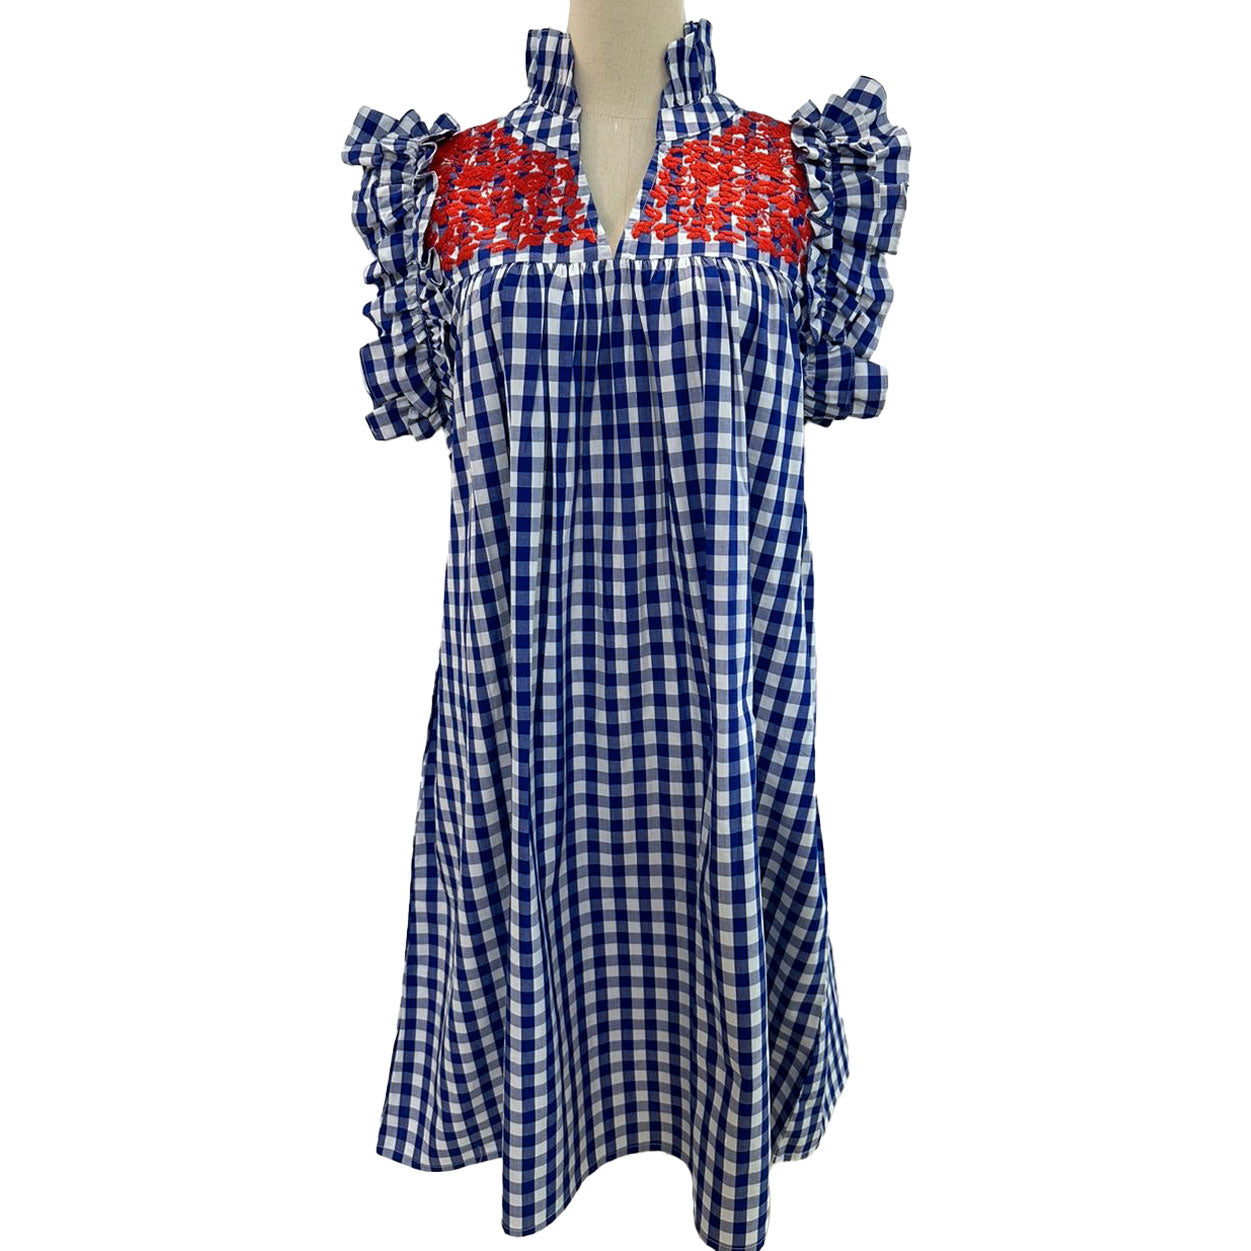 PRE-ORDER: Fourth of July Buffalo Check Hummingbird Dress with Pockets (shipping first week of June)